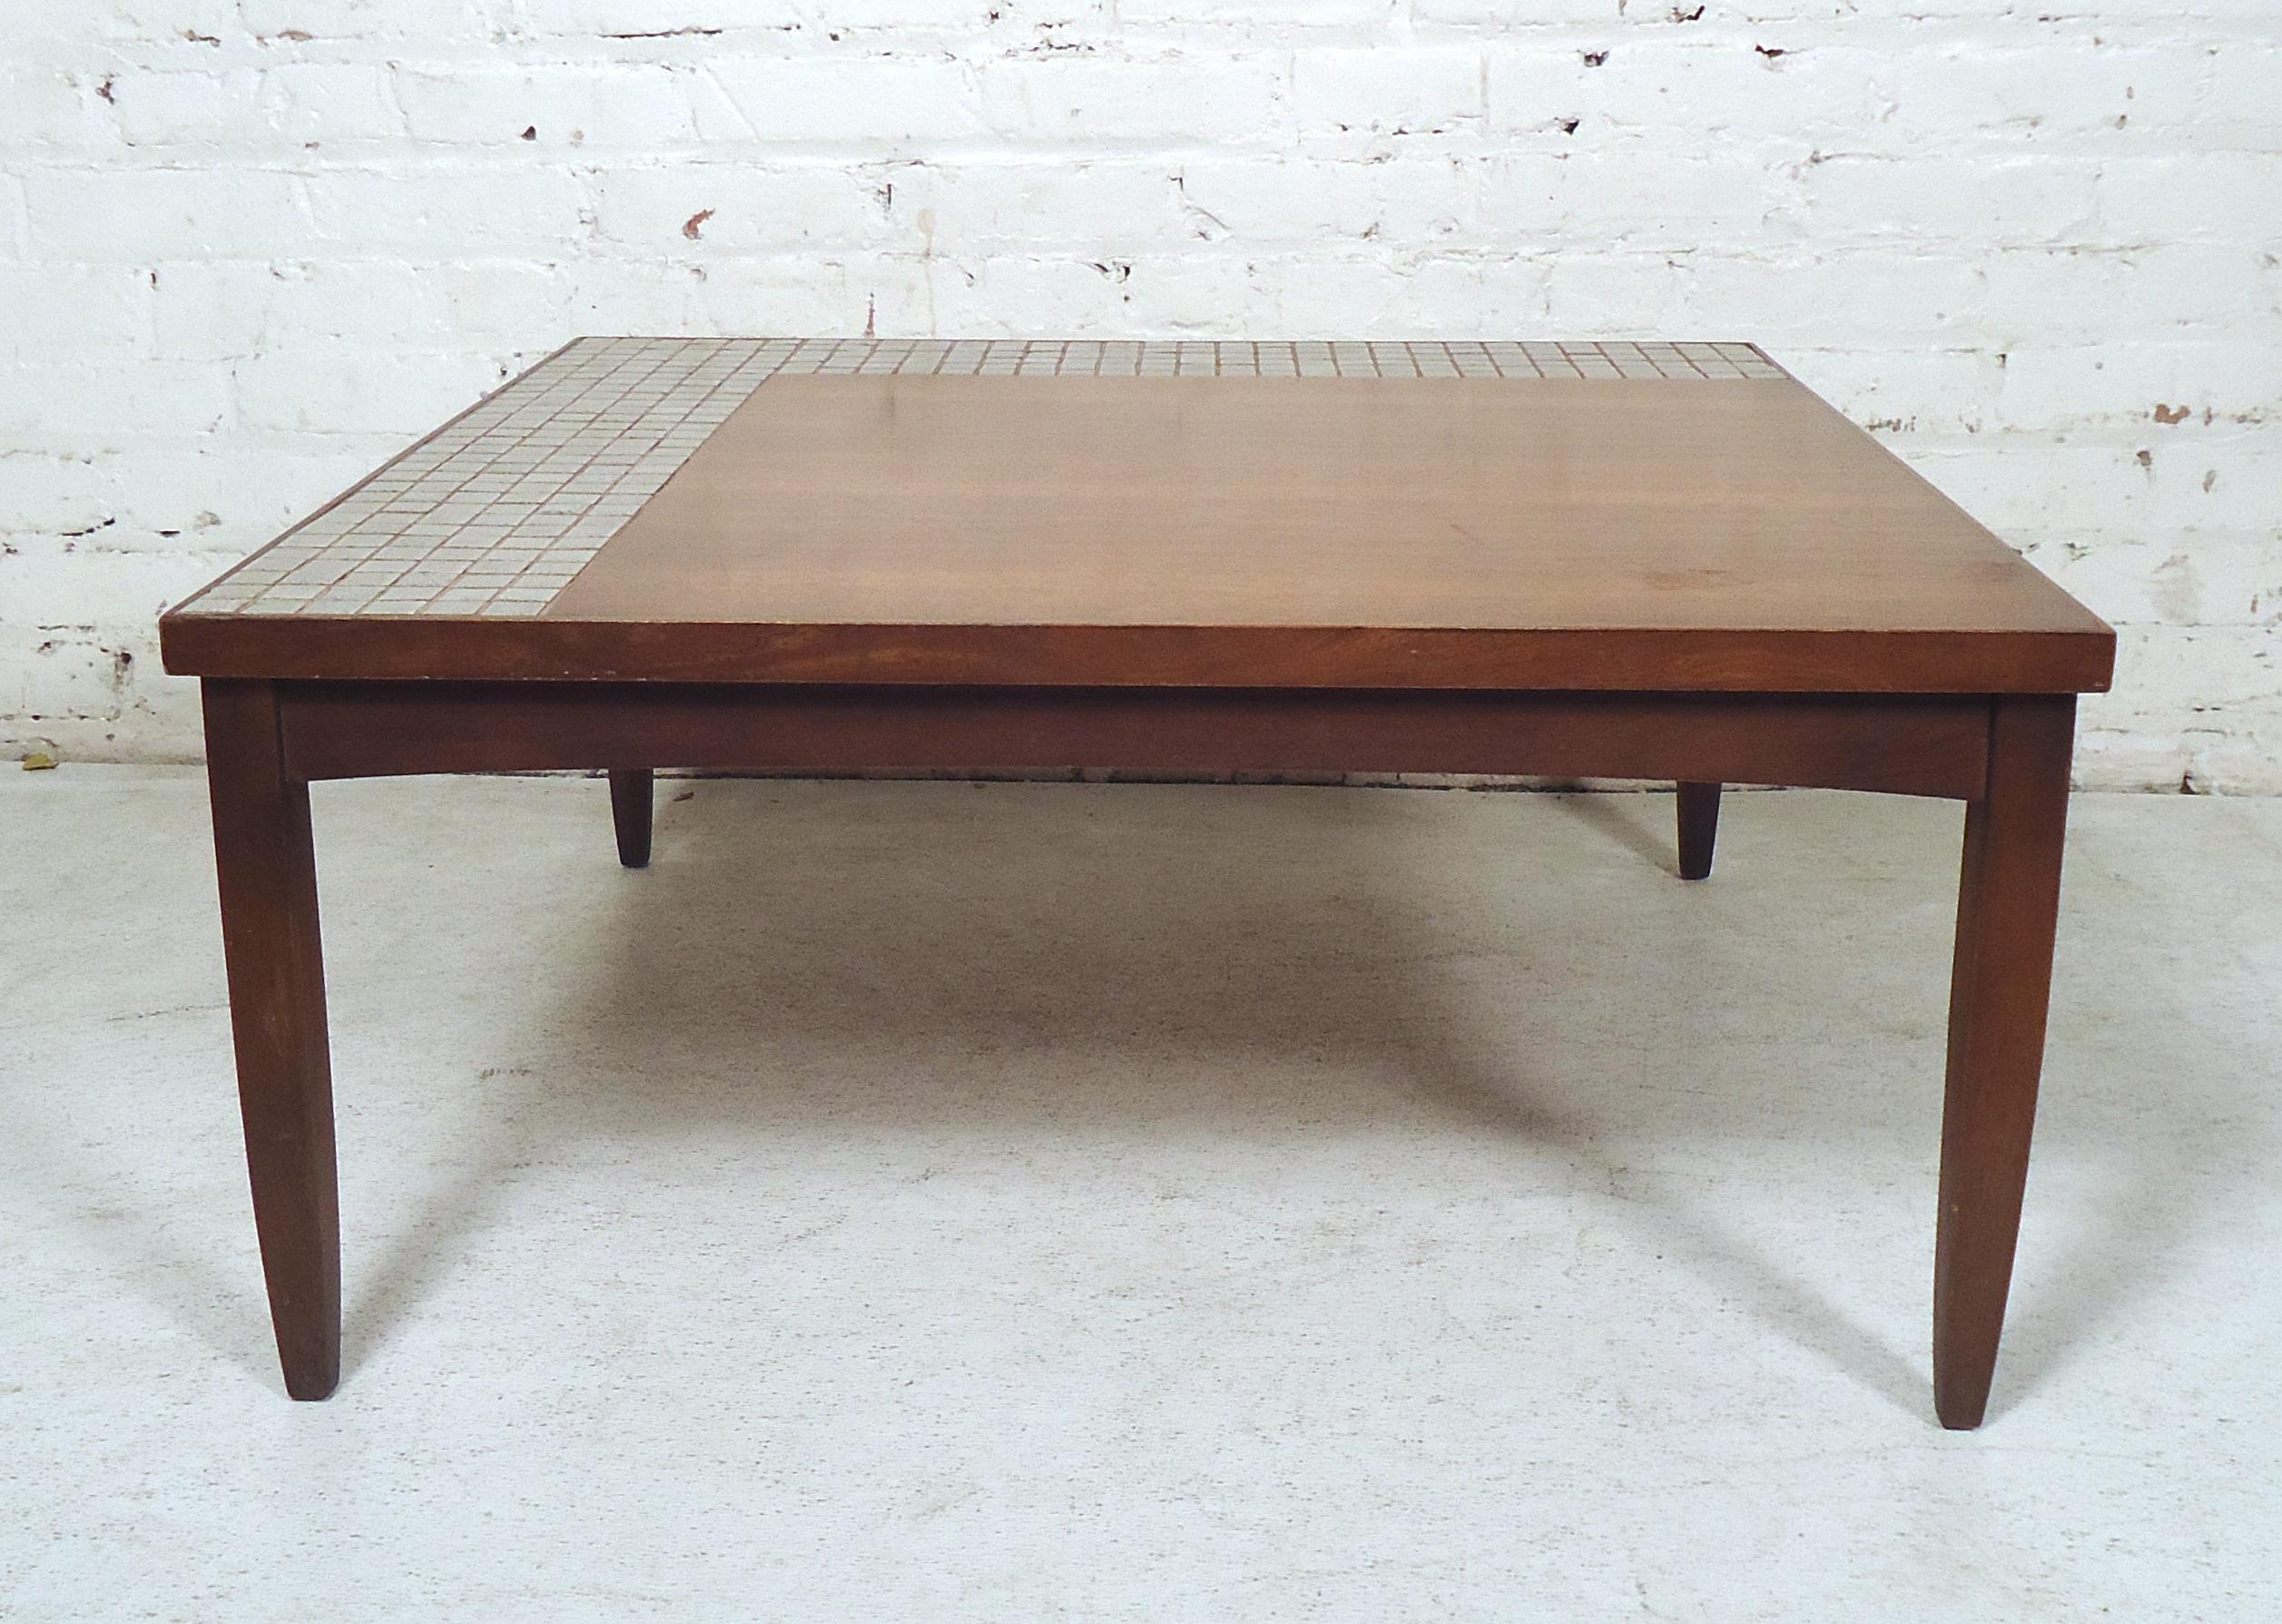 Unique vintage modern walnut coffee table by Lane featuring a tiled top and rich walnut grain.

Please confirm item location (NY or NJ).